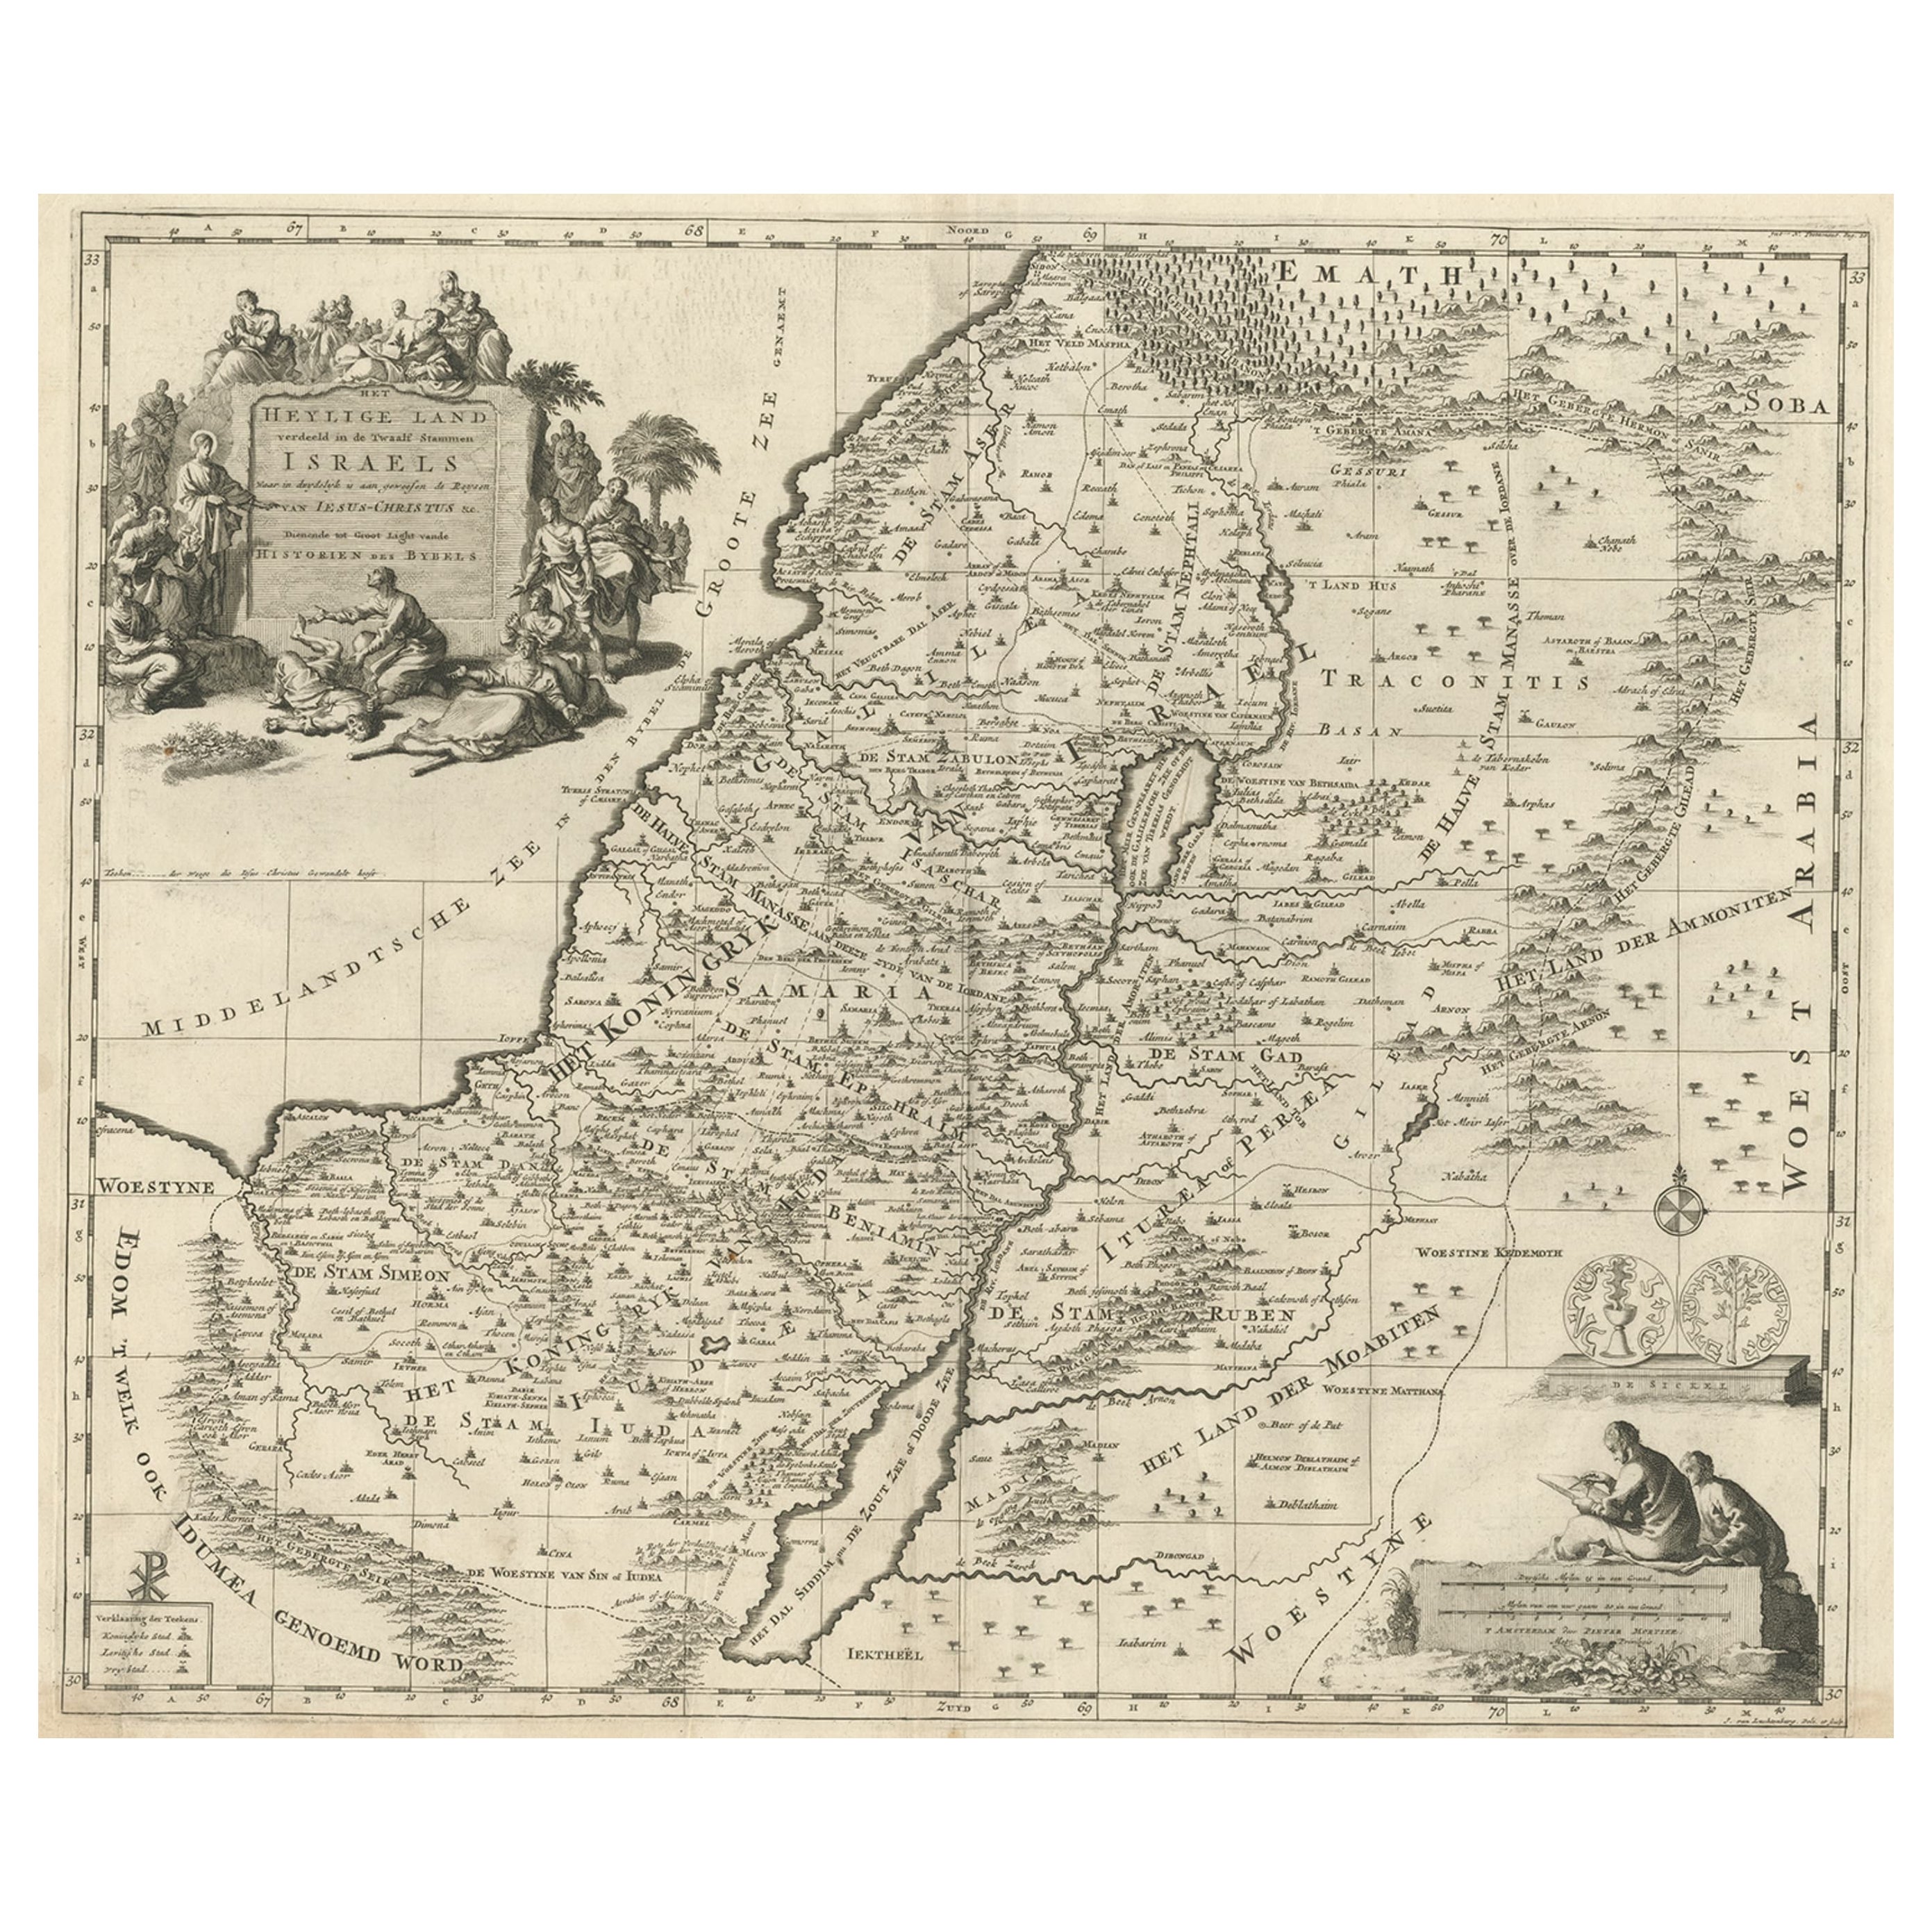 Map of the Holy Land Divided into 12 Tribes, the Travels of Jesus Christ, 1700